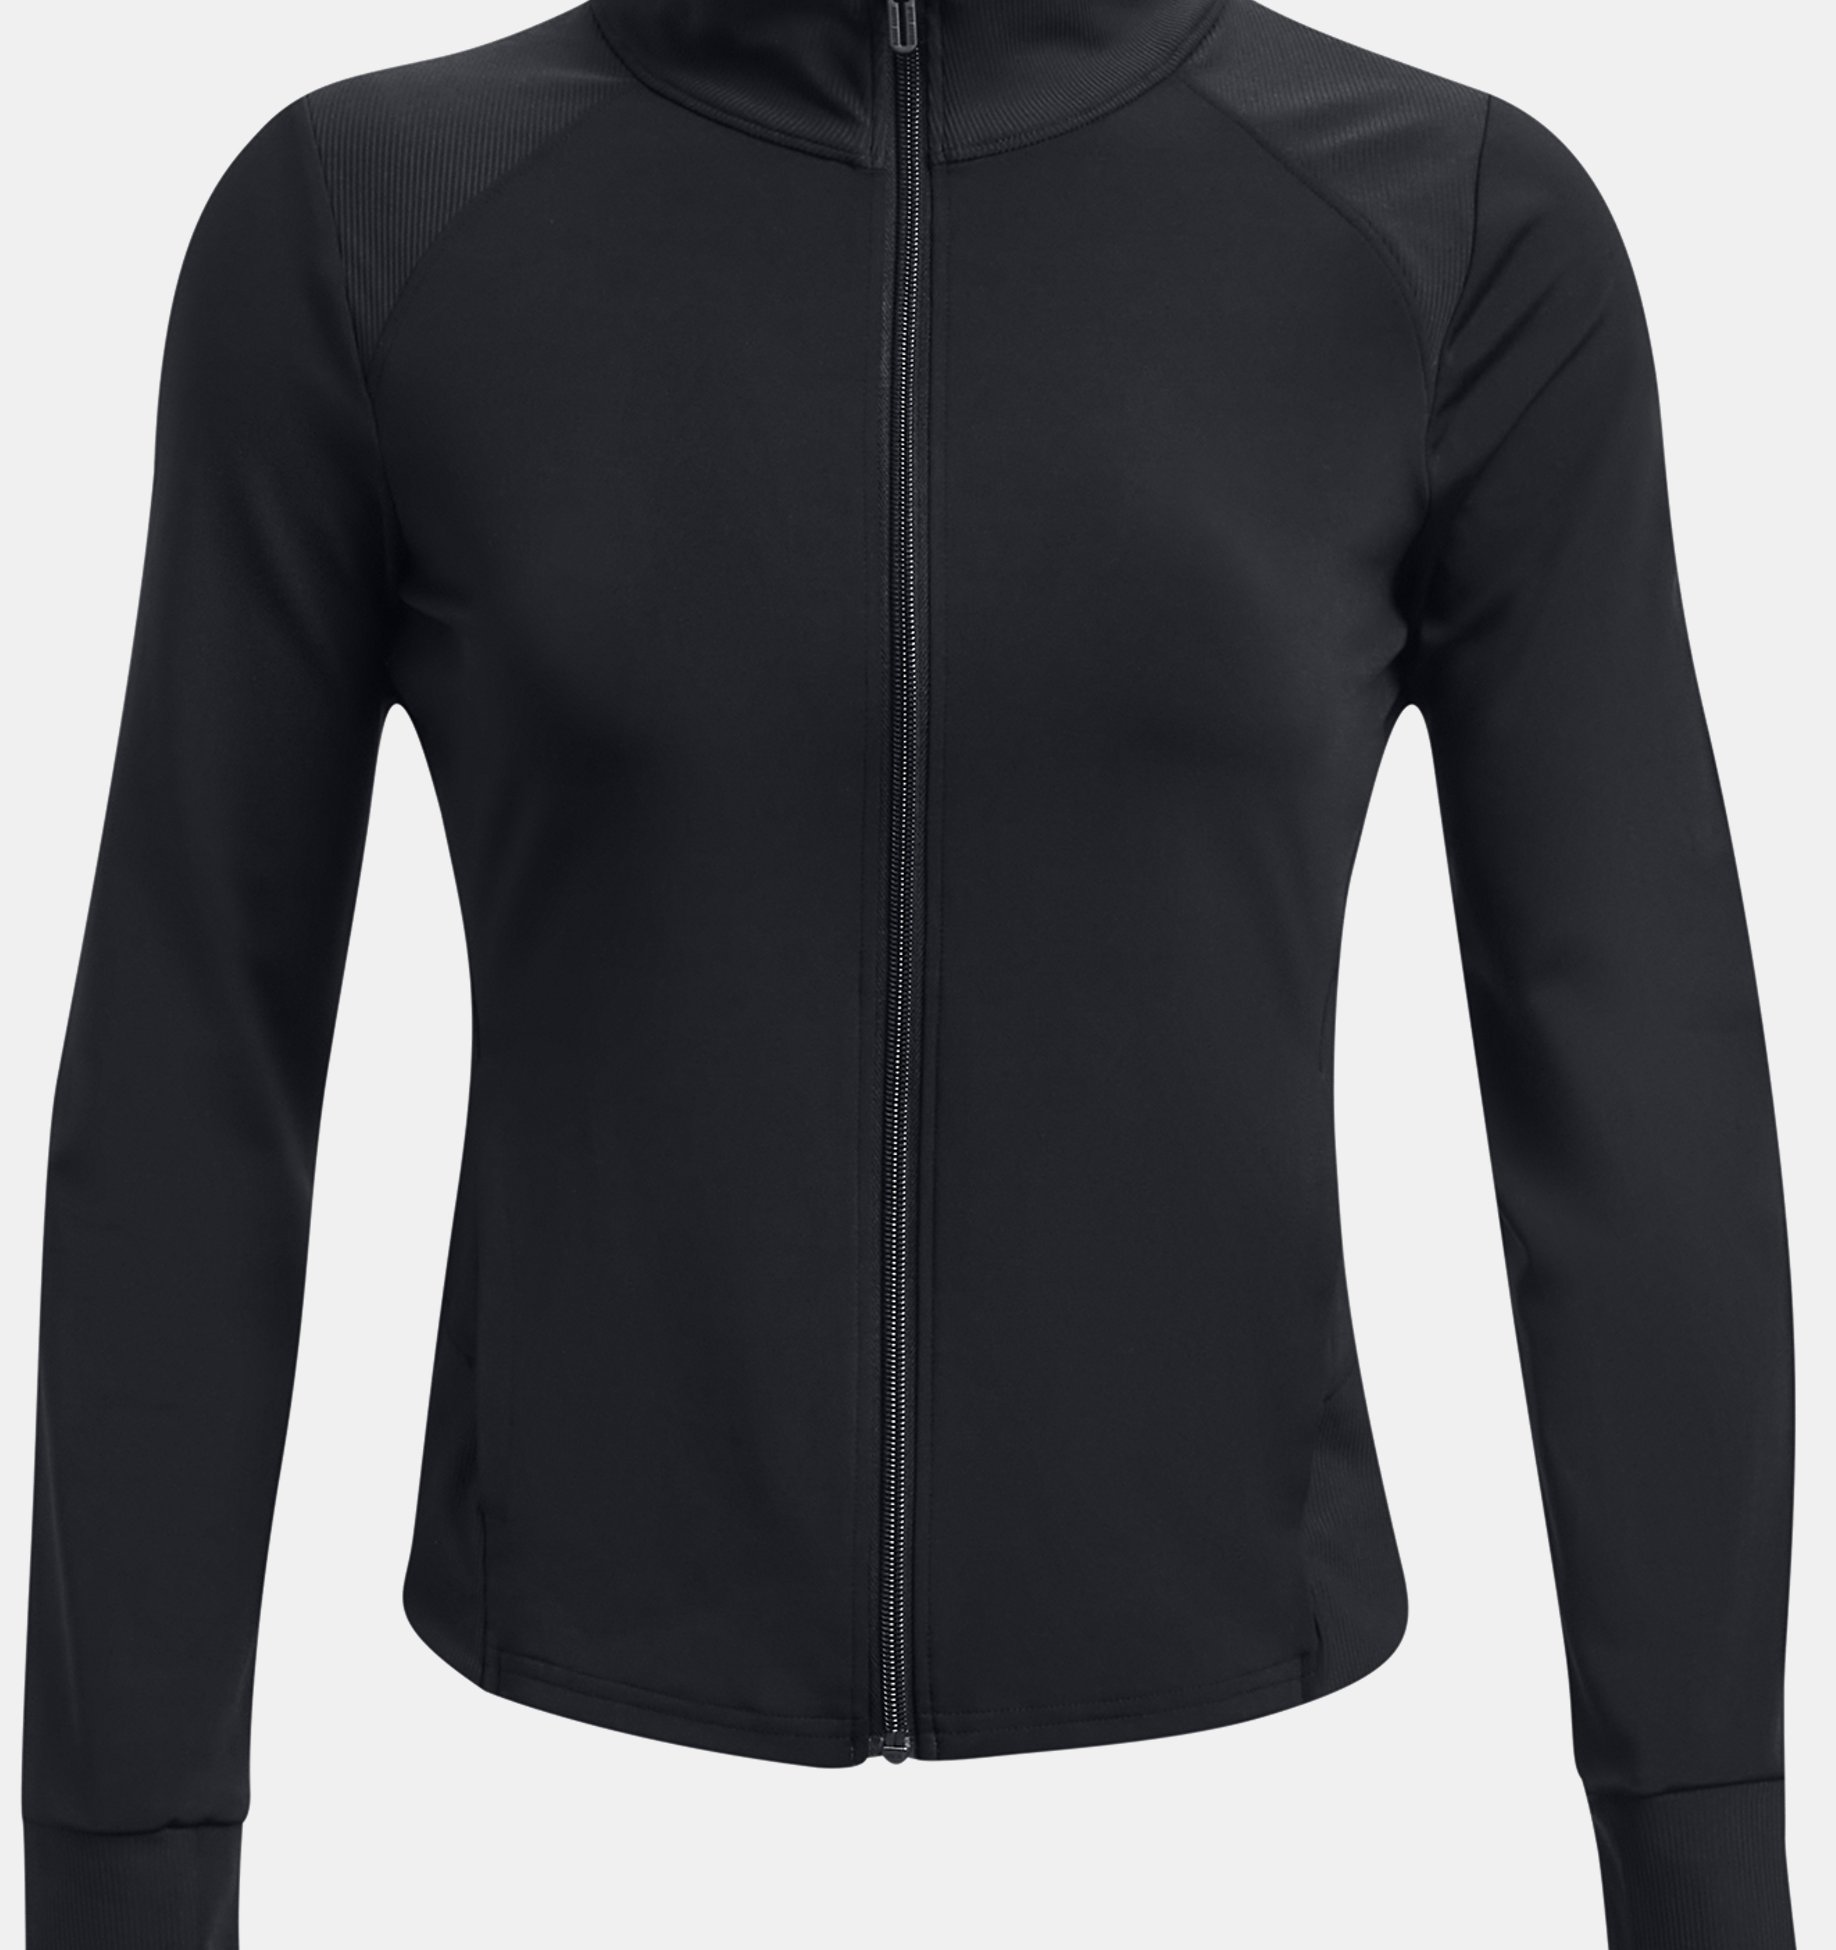 Under Armour Womens Meridian Jacket Black XS Extra Small Adult Athletic  Wear 